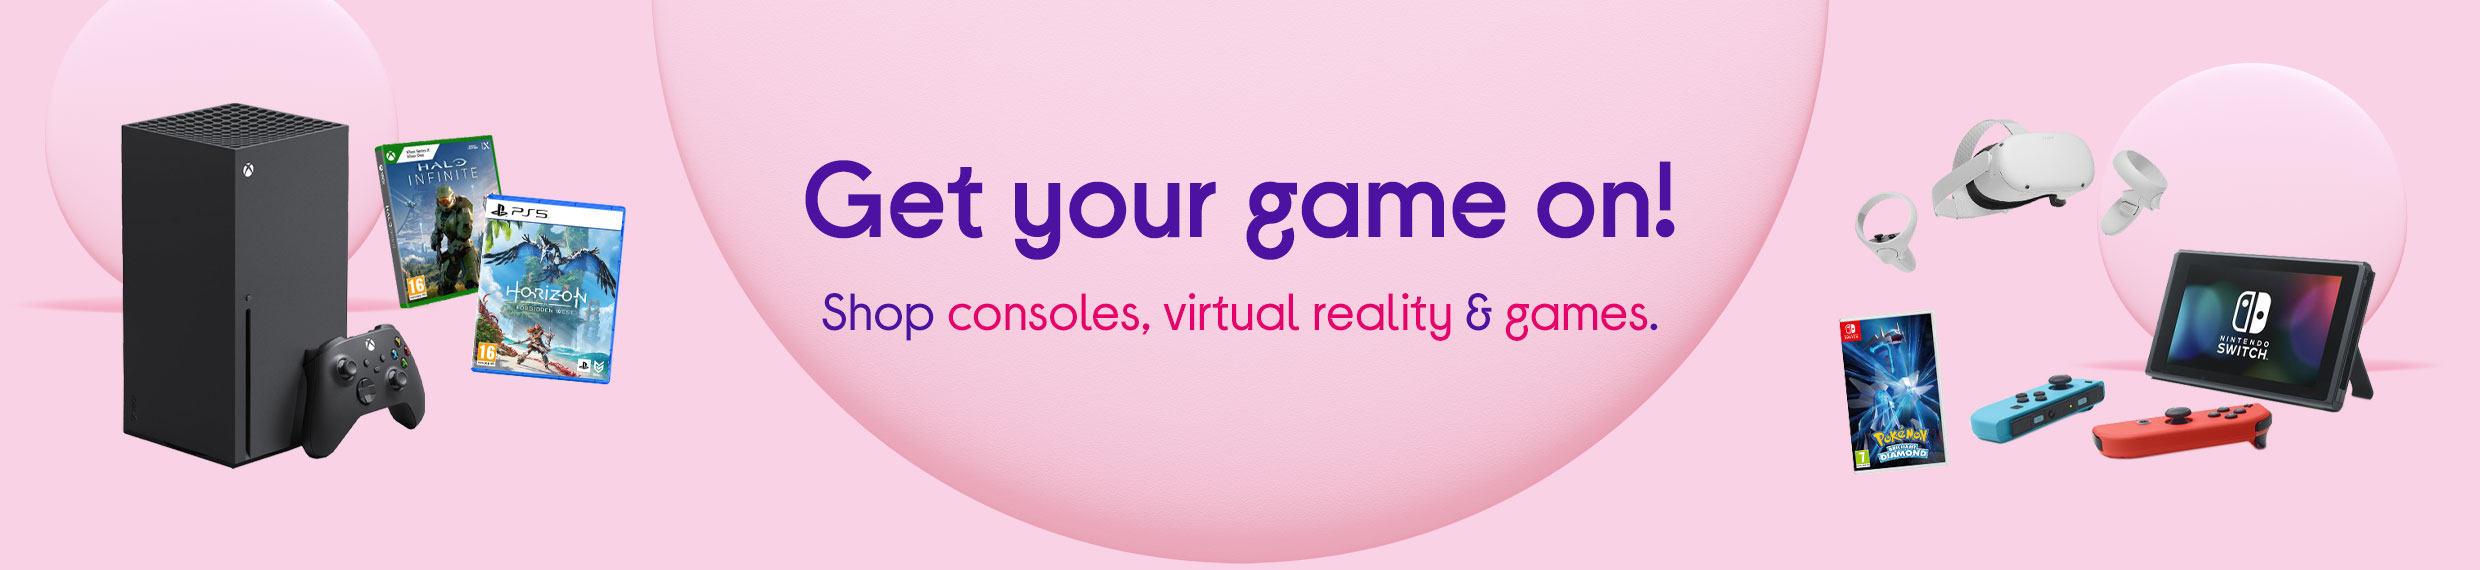 Consoles, VR and Games at Currys